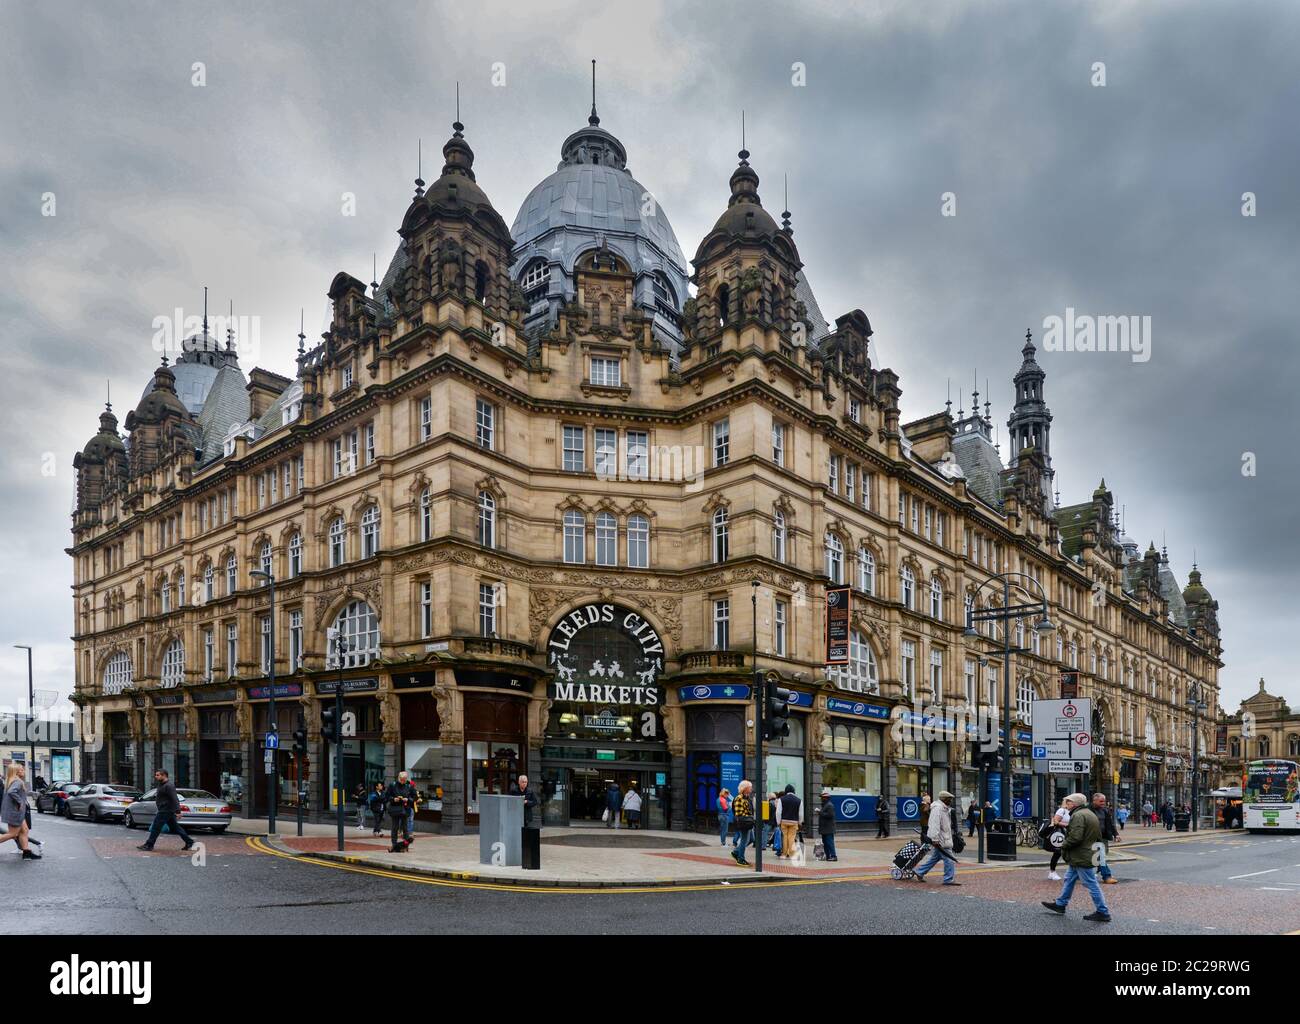 Leeds is a city with a rich #retail #heritage Leeds #Market has